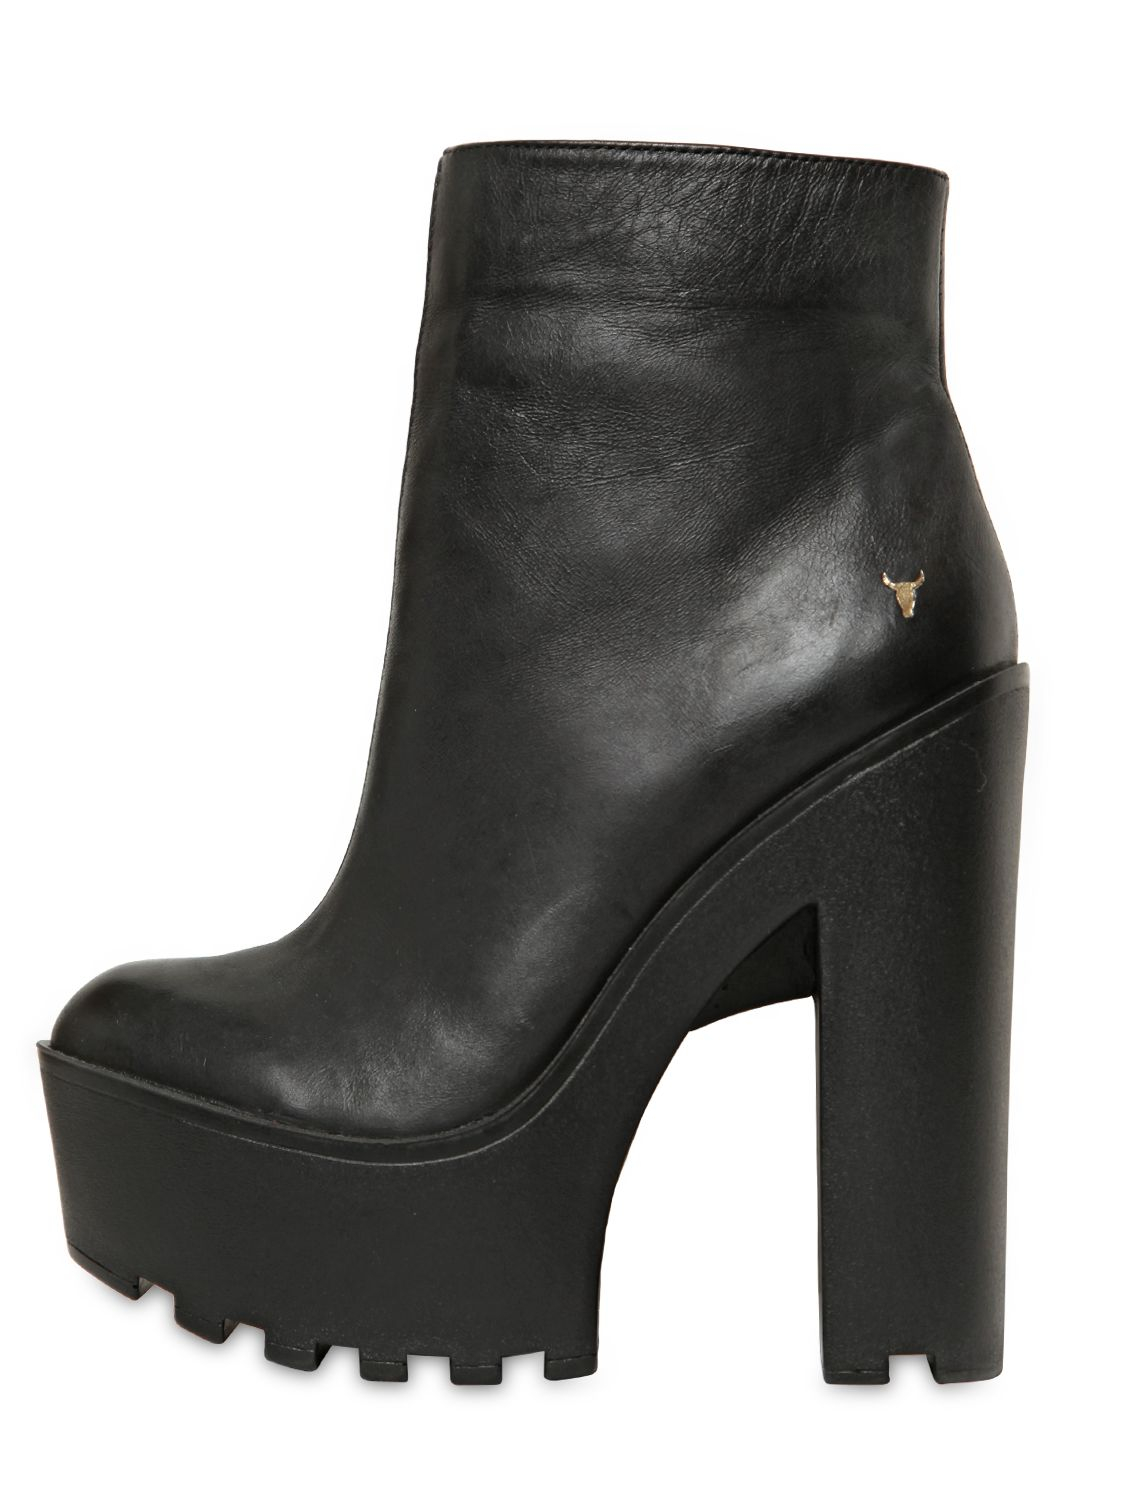 Windsor Smith 140mm Hunt Leather Ankle Boots in Black - Lyst